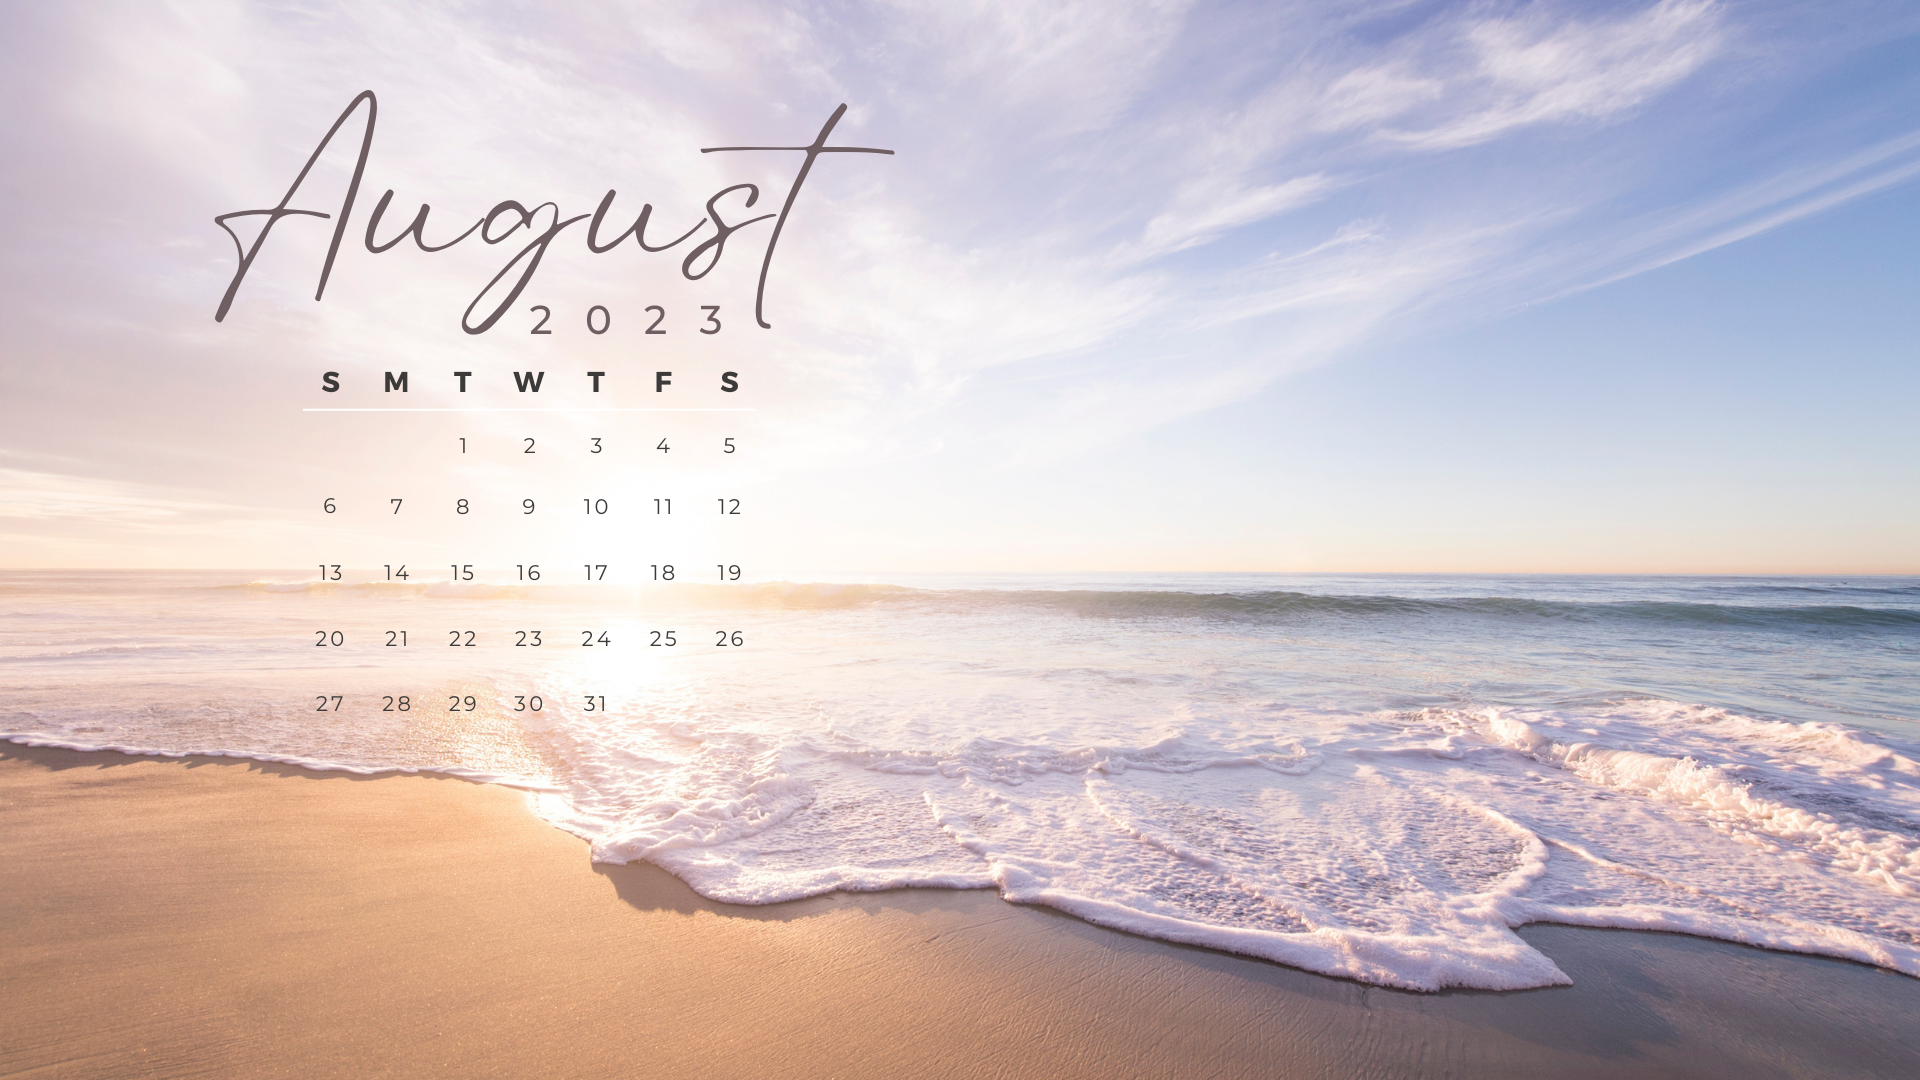 August 2023 desktop calendar backgrounds;  Here are your free August backgrounds for computers and laptops. Tech freebies for this month!